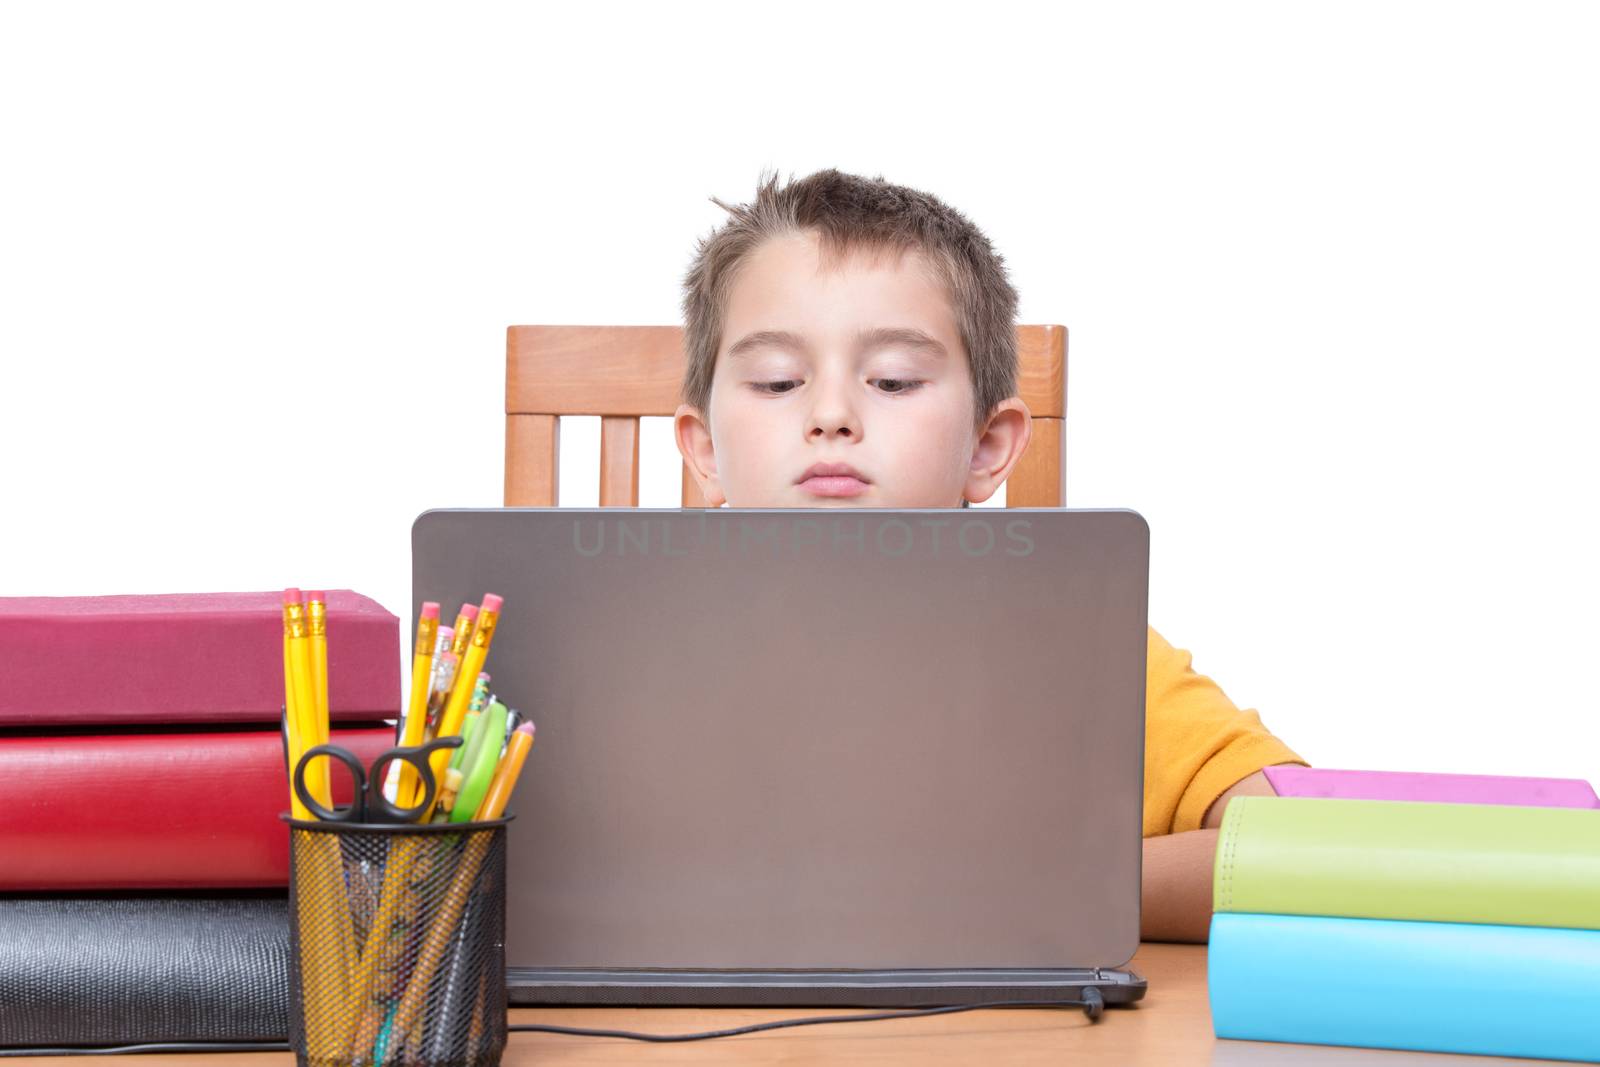 Young Boy Looking Down at Laptop Computer Screen While Studying at Desk with Pencil Holder and Supplies and Surrounded by Colorful Books and Binders, in Room with White Background and Copy Space